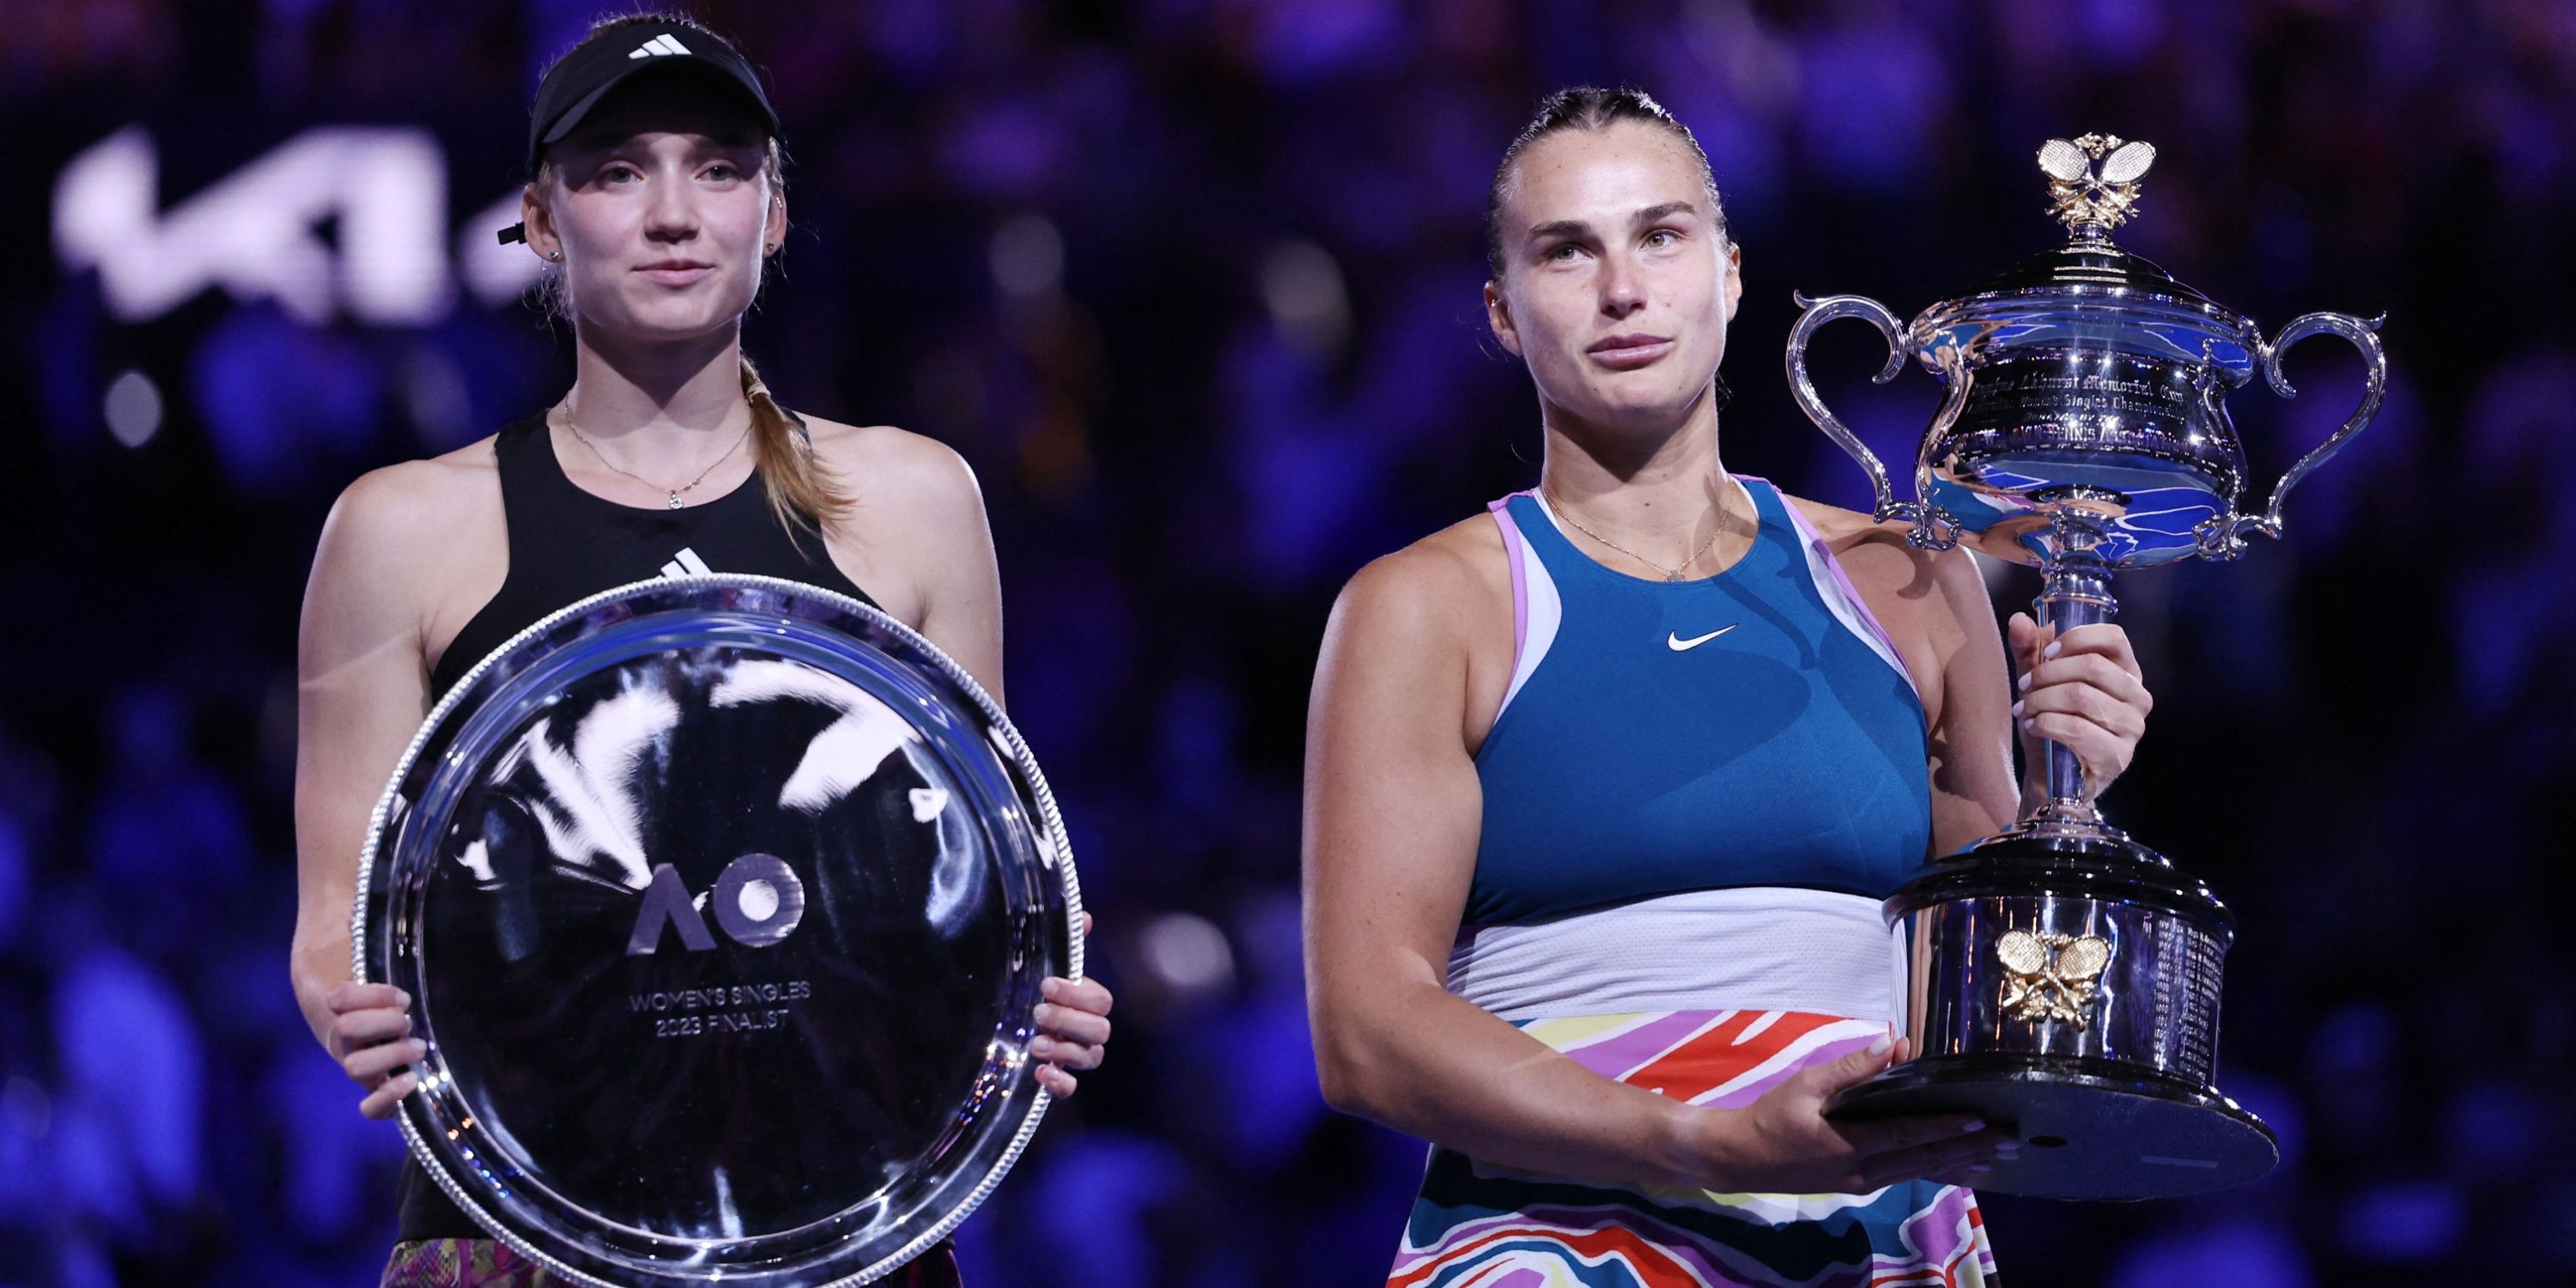 Belarus’ Aryna Sabalenka celebrates with the trophy after winning her final match as Kazakhstan’s Elena Rybakina is pictured with the runners-up trophy.